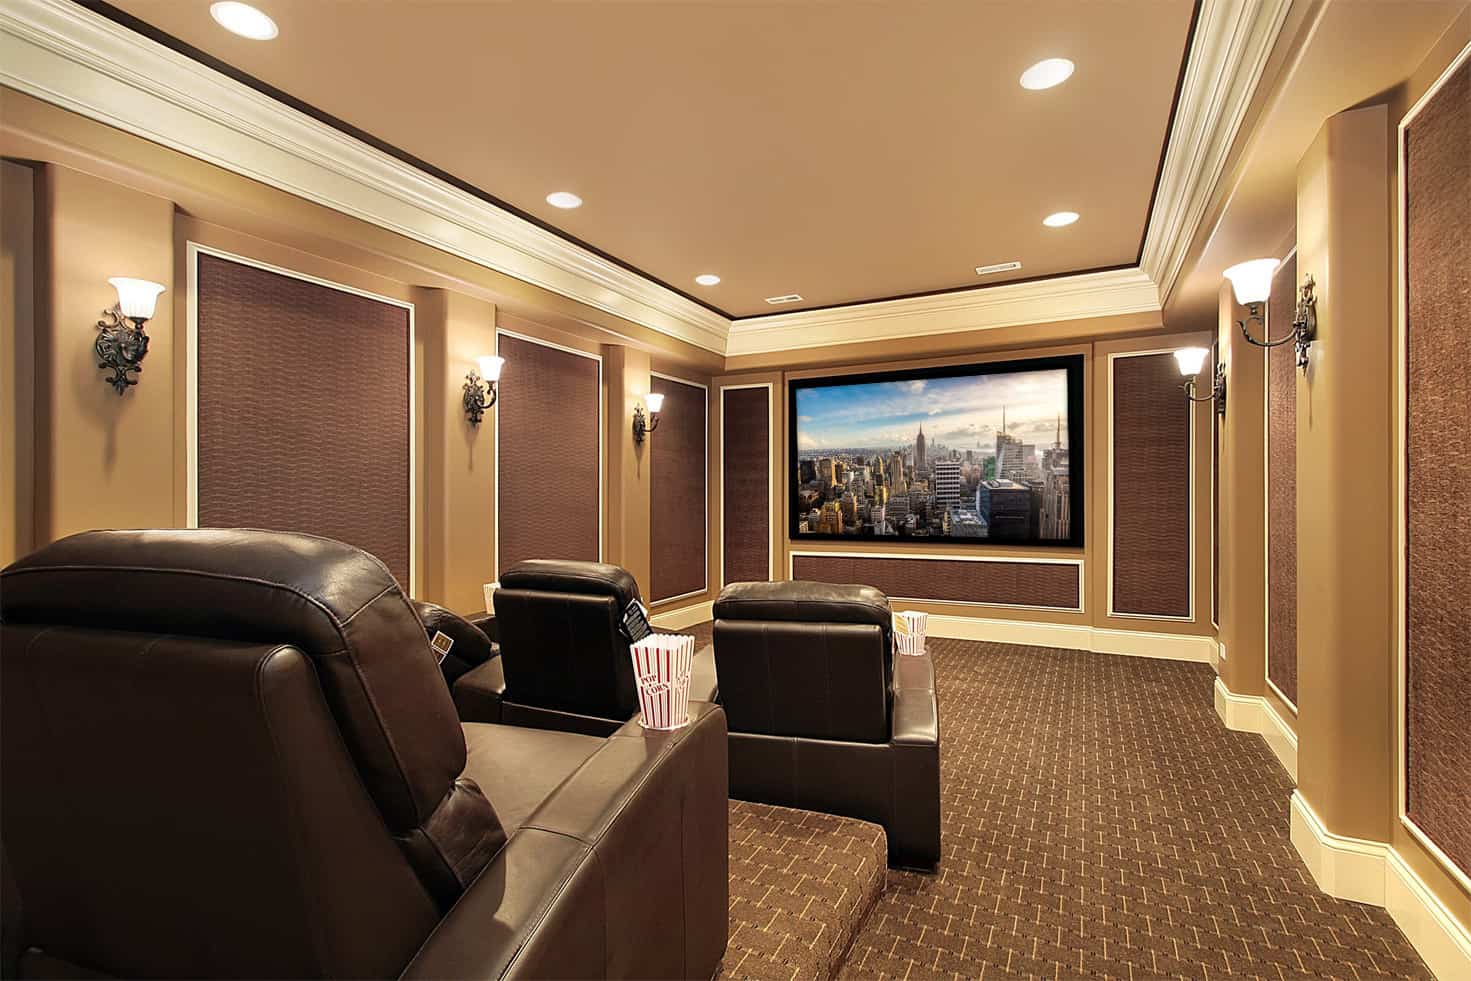 Creative Home Theater Design Images Ideas in 2022